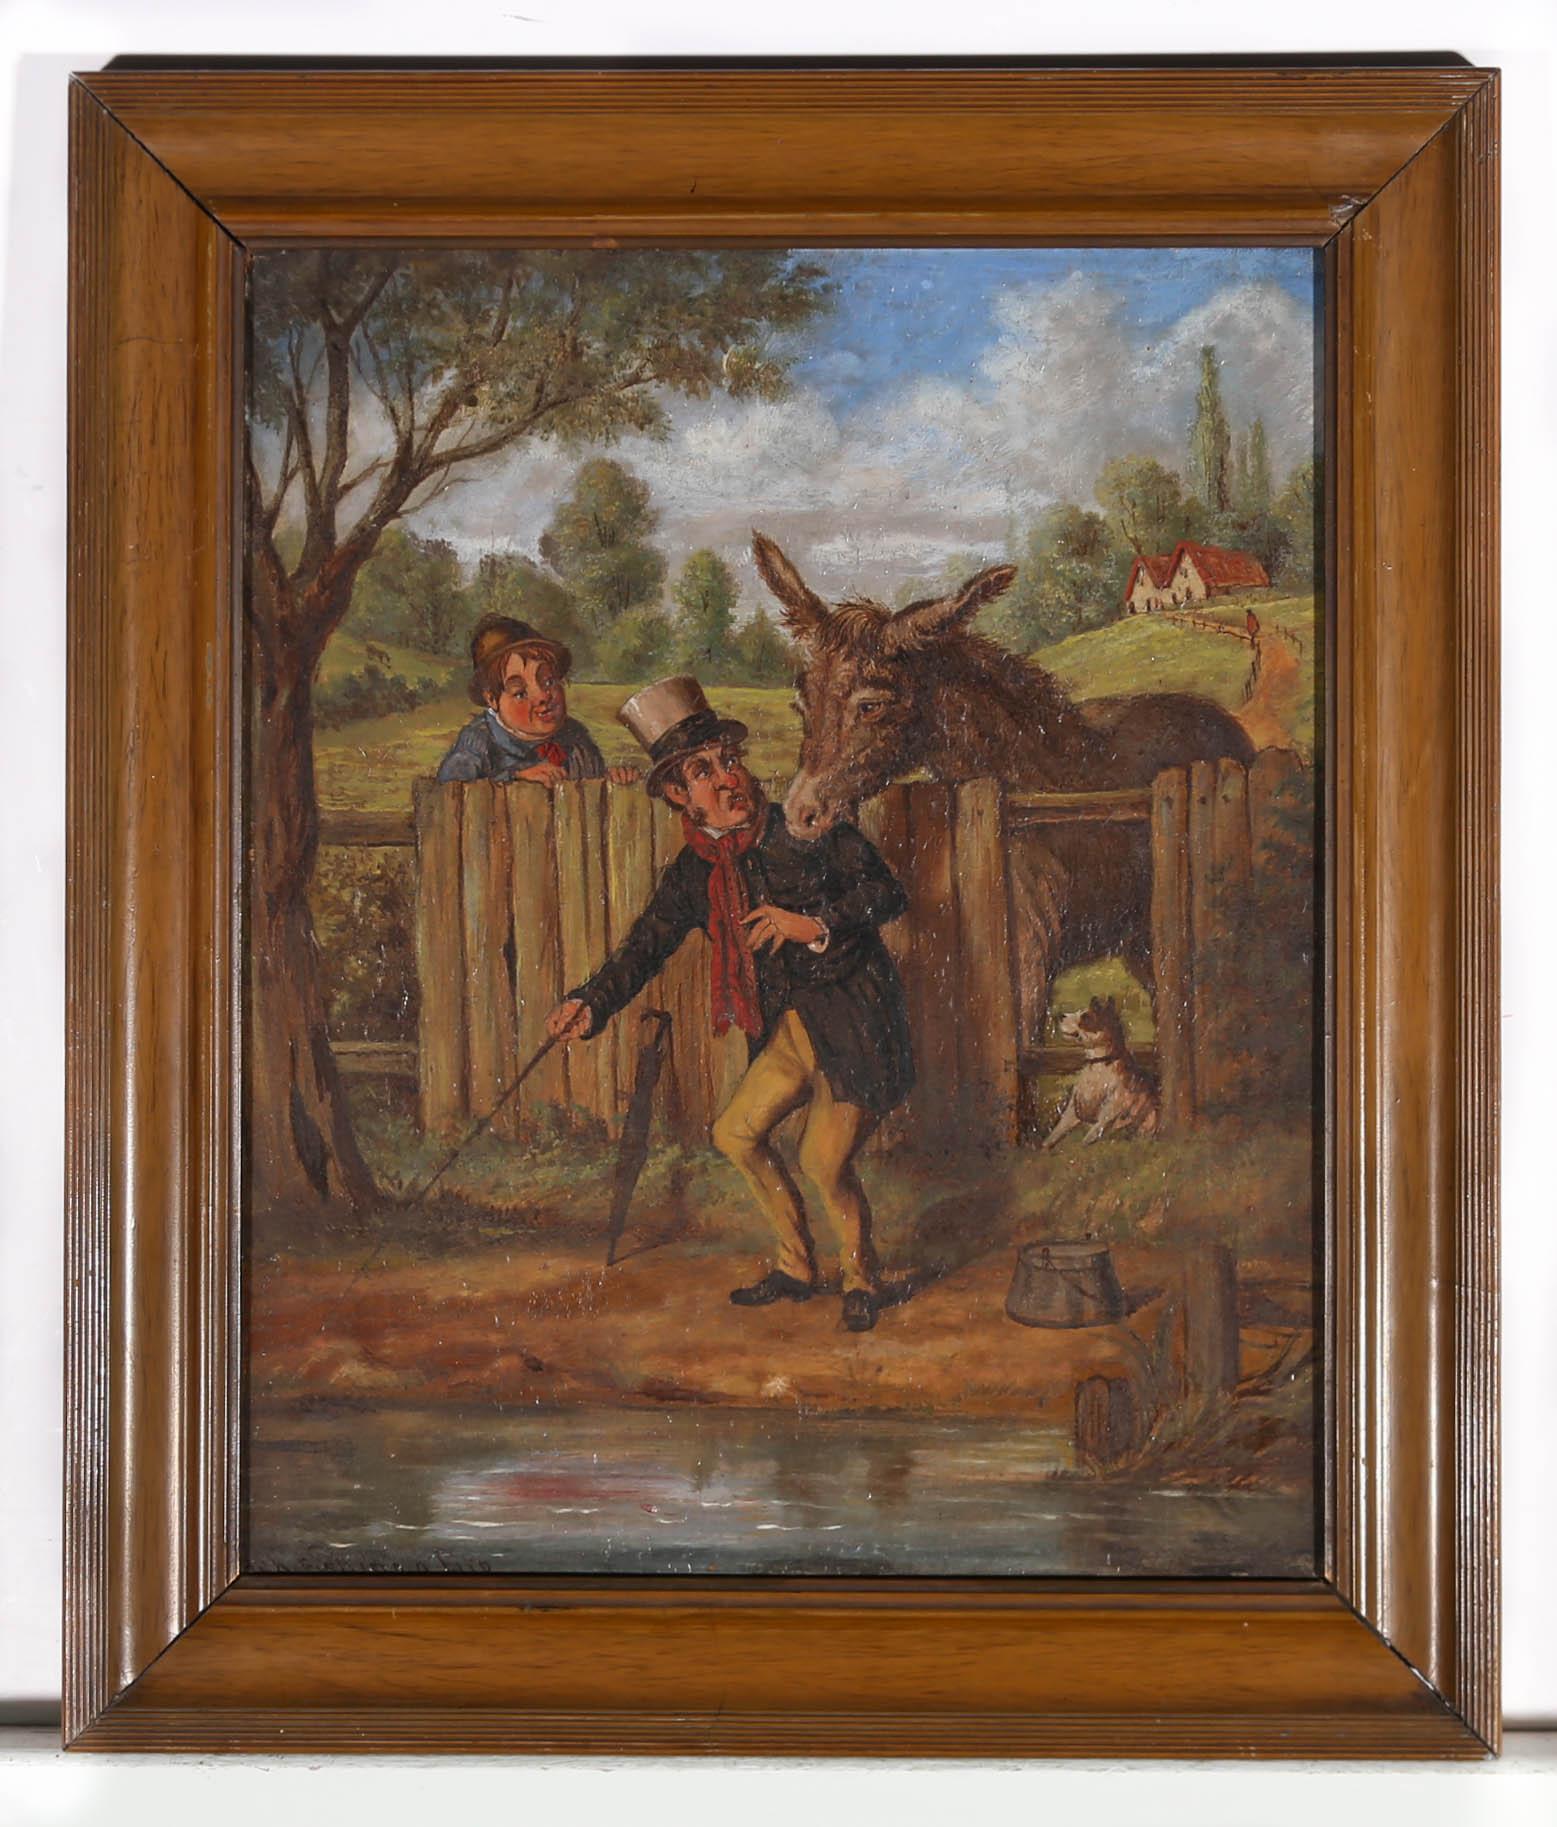 A thoroughly charming and humorous 19th Century scene, showing a smartly dressed gentleman on the bank of a stream with his fishing rod, being rudely interrupted by a mischievous donkey, biting his jacket over a fence. A red faced young boy watches